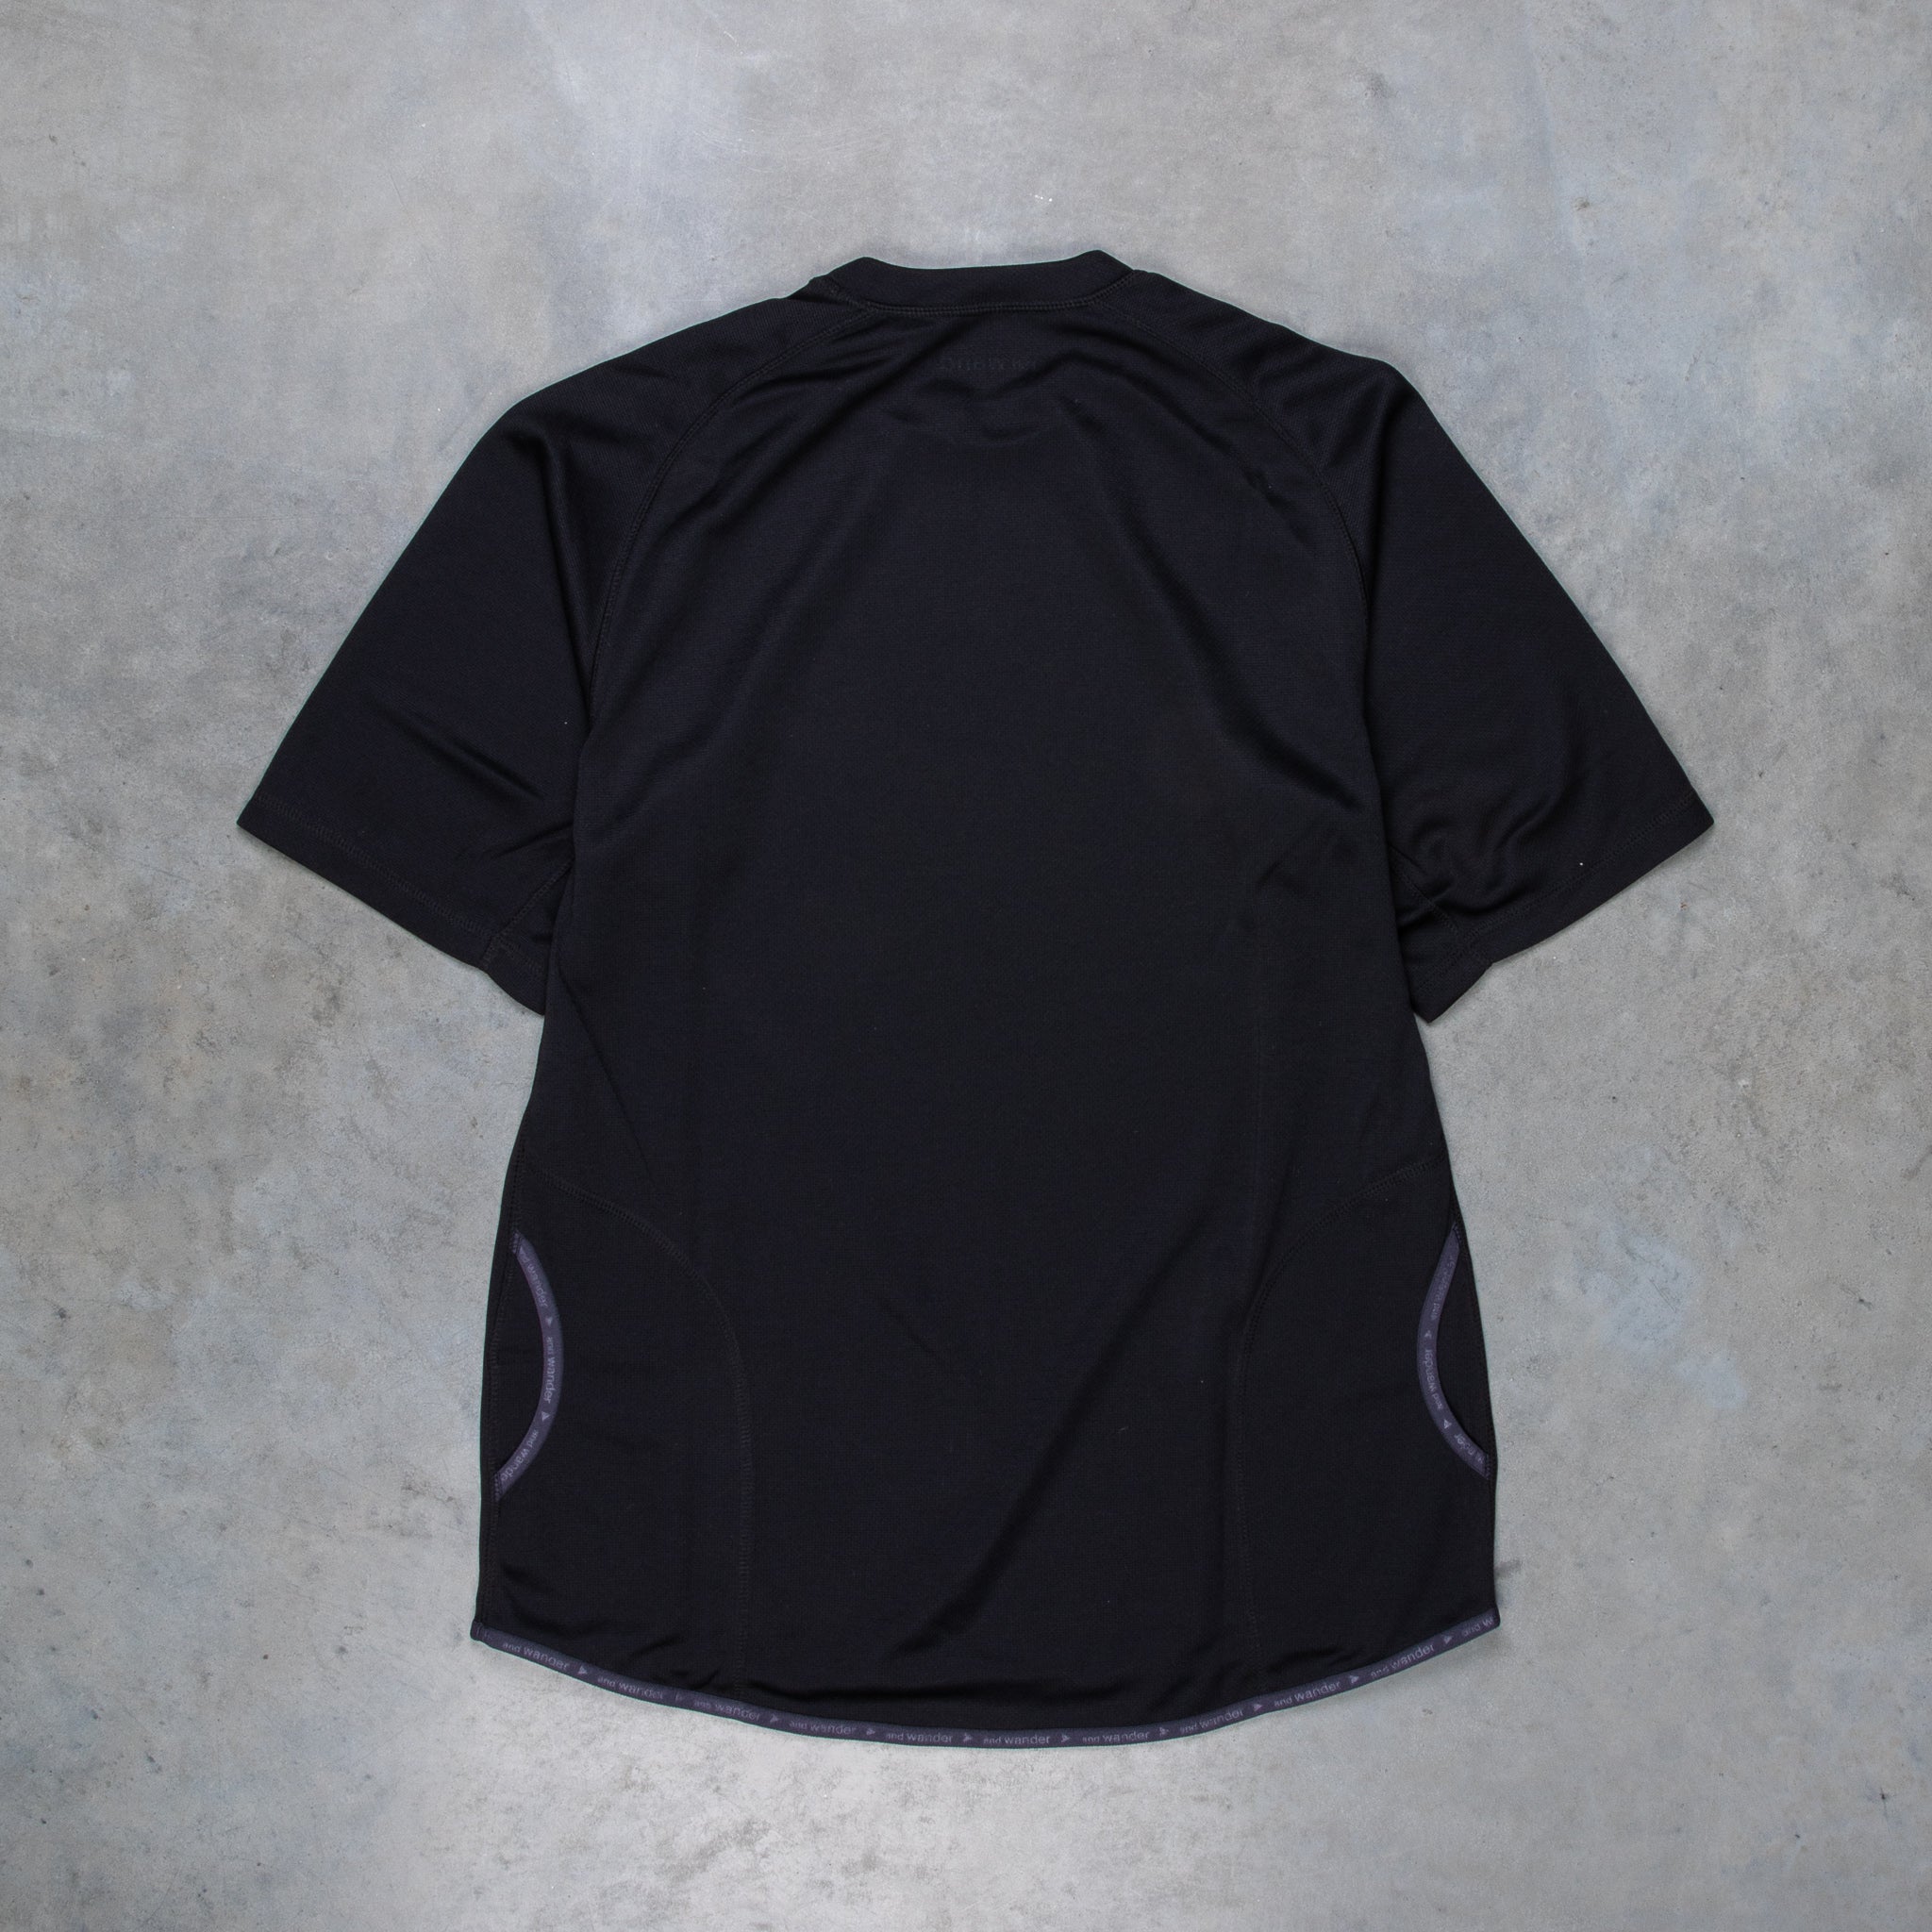 And Wander Power Dry Jersey Raglan SS T Black – Frans Boone Store